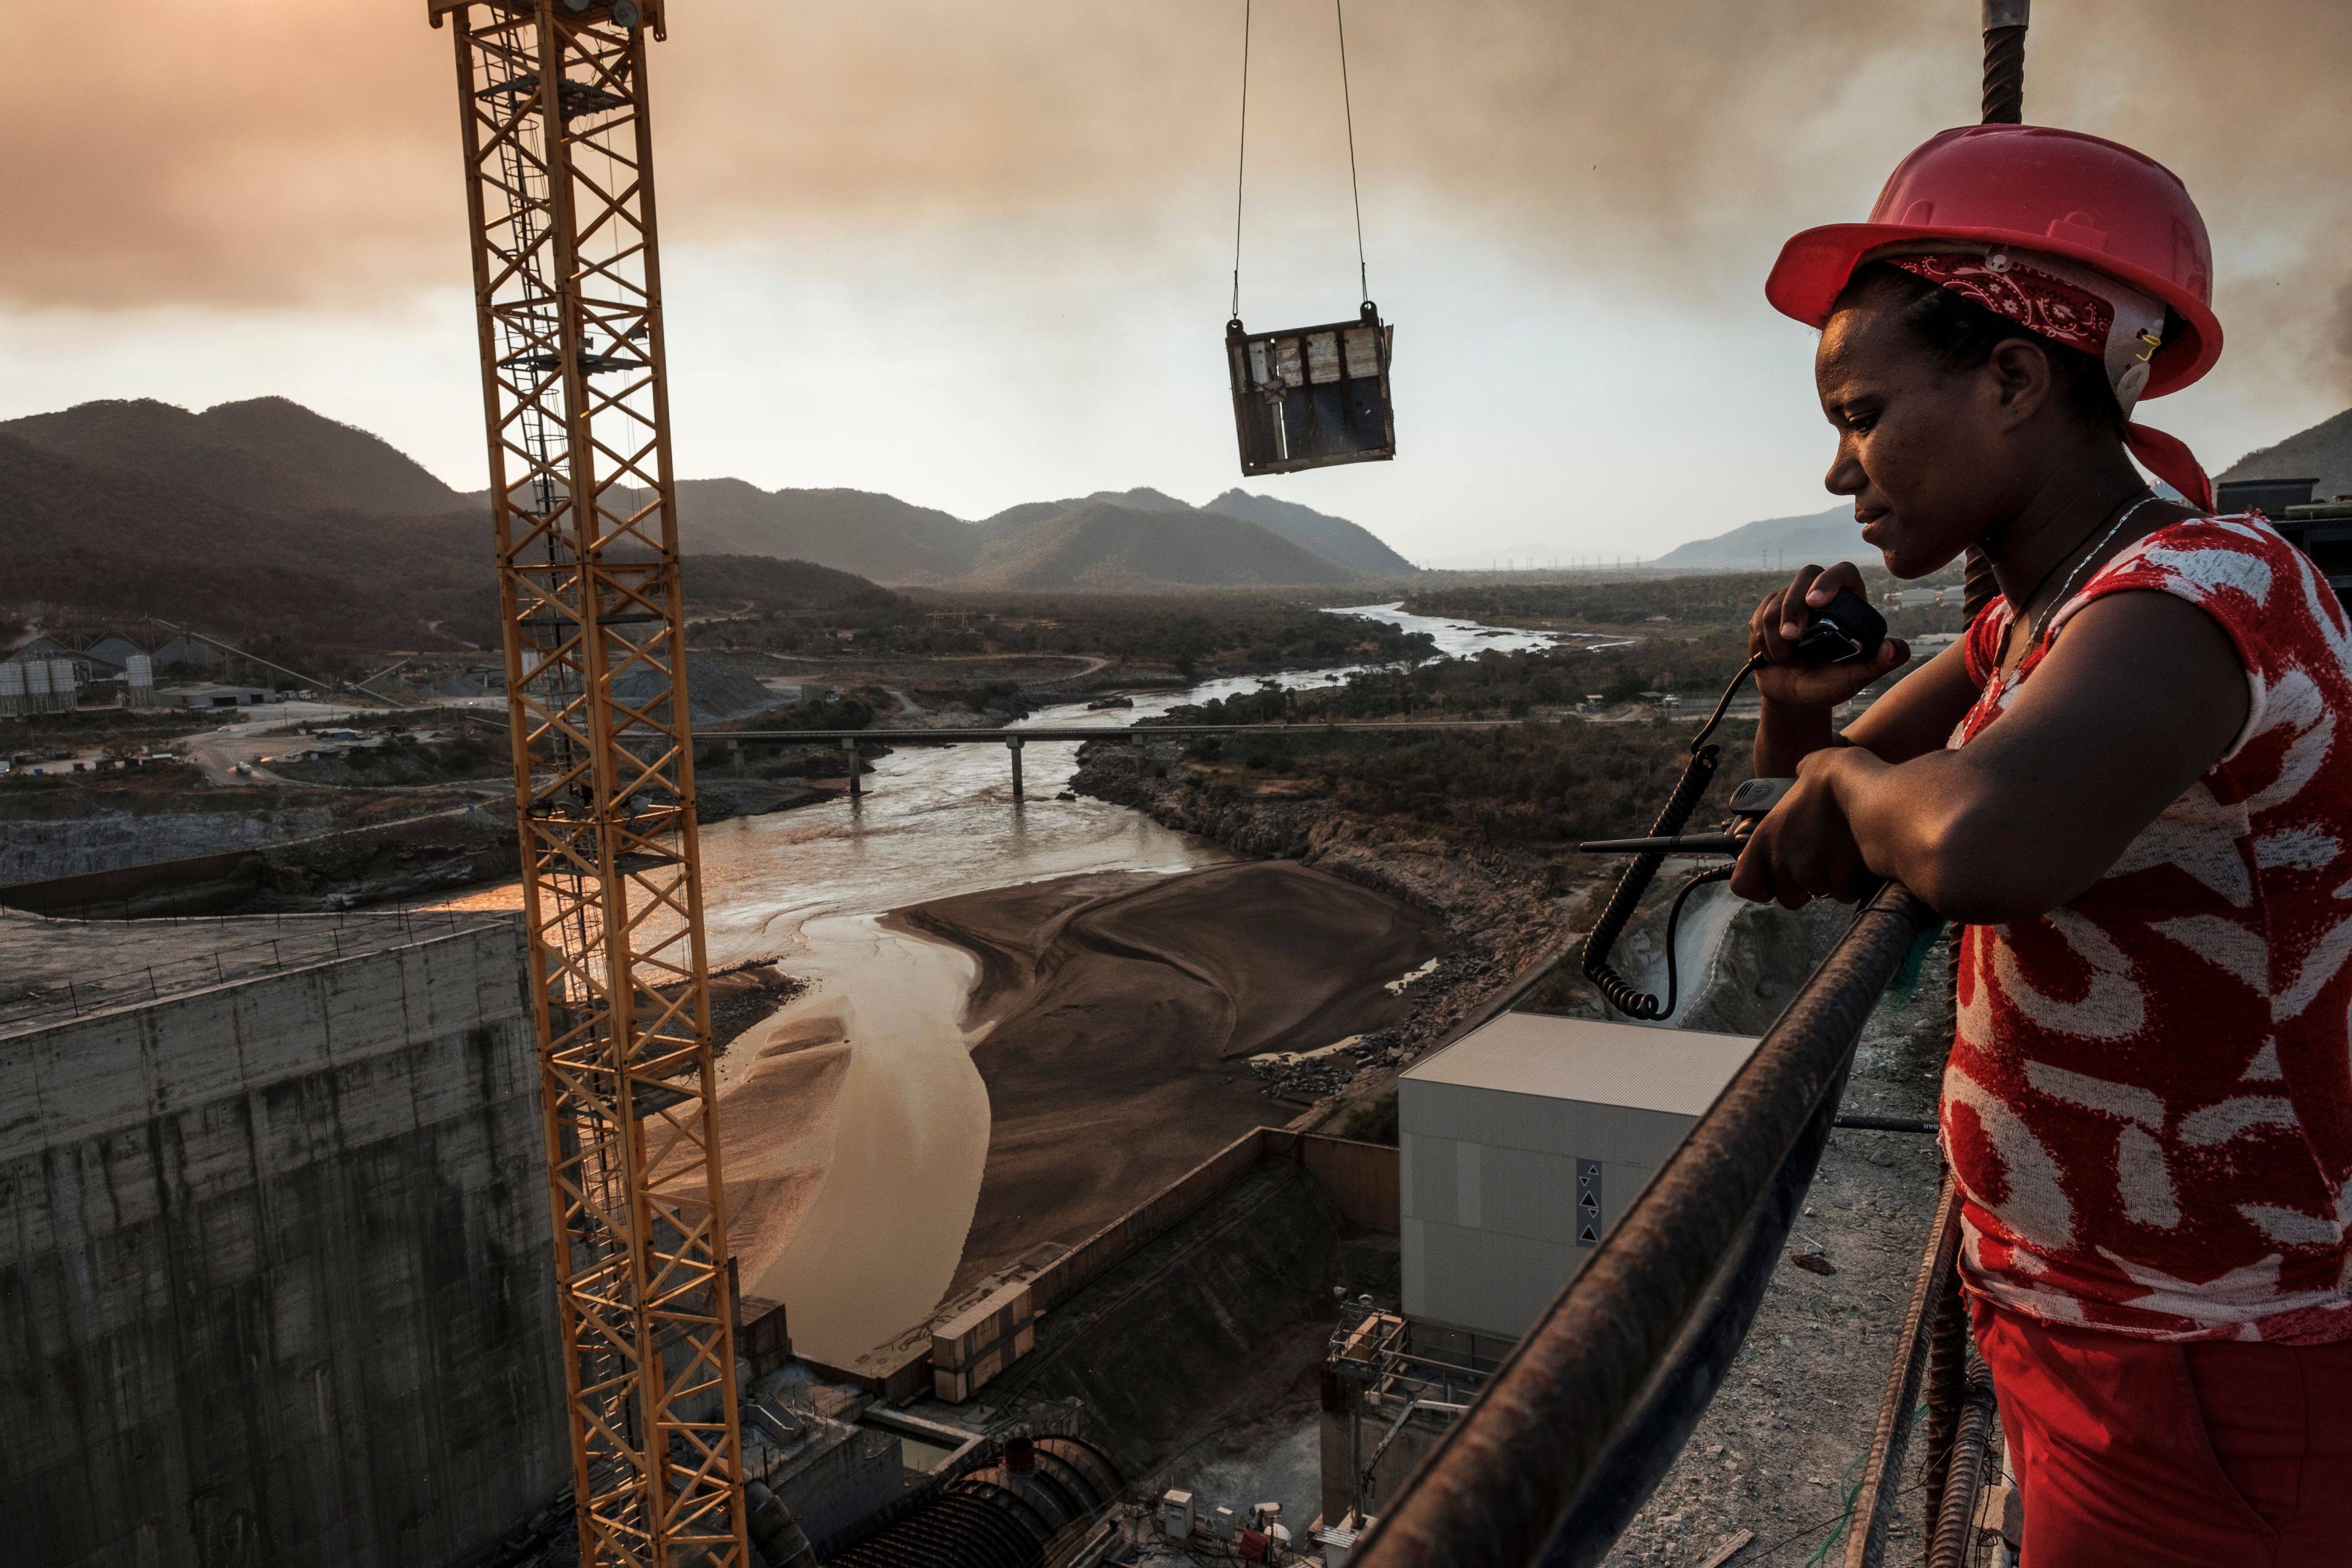 Last year saw an increase in Chinese construction contracts and investments in Africa, signalling a recovery from the pandemic-led slowdown. Photo: AFP